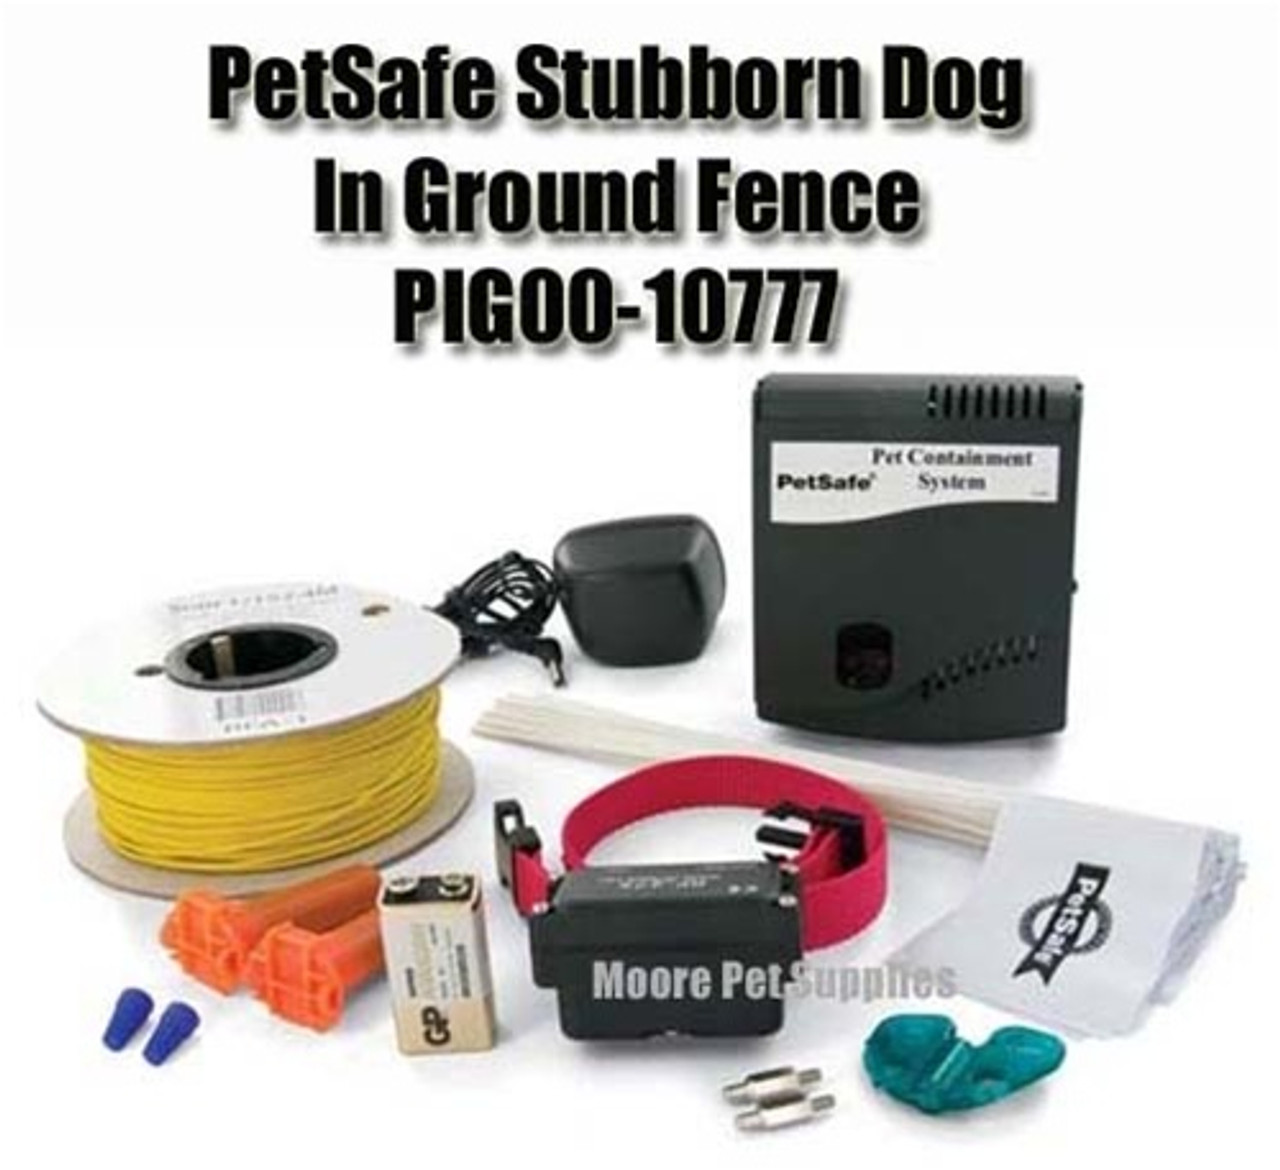 PetSafe—How to Troubleshoot the In-Ground Fence for Little Dogs